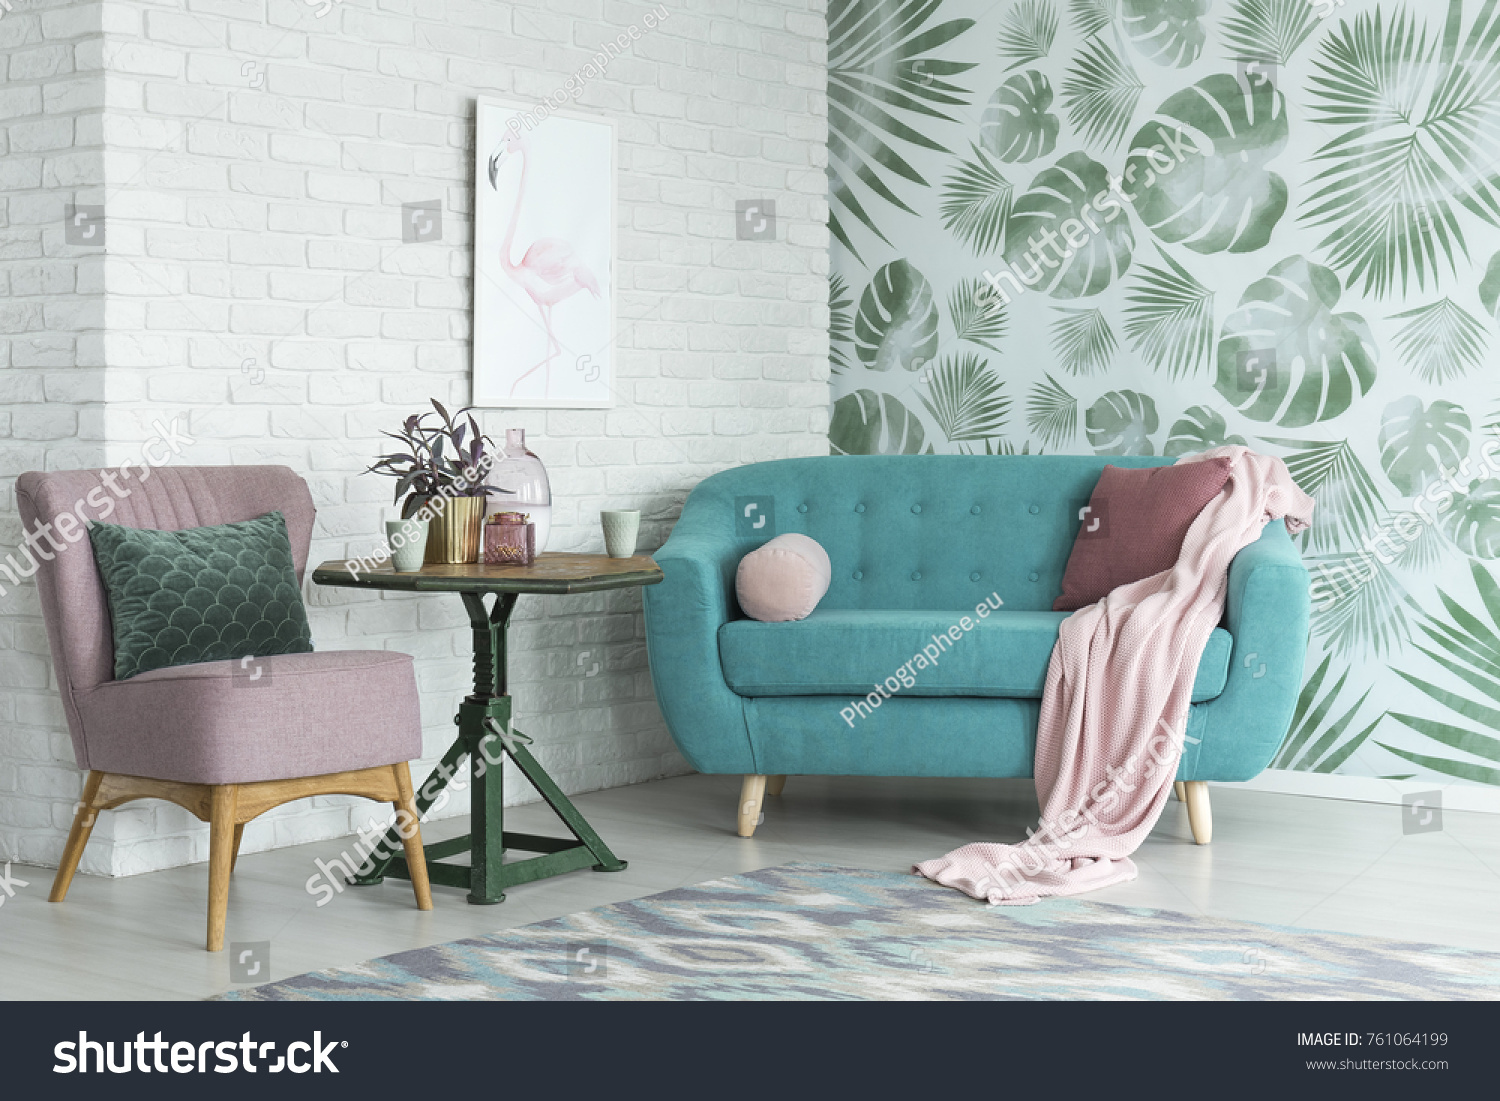 Green table with a plant between pink chair and blue sofa in floral living room with wallpaper and poster